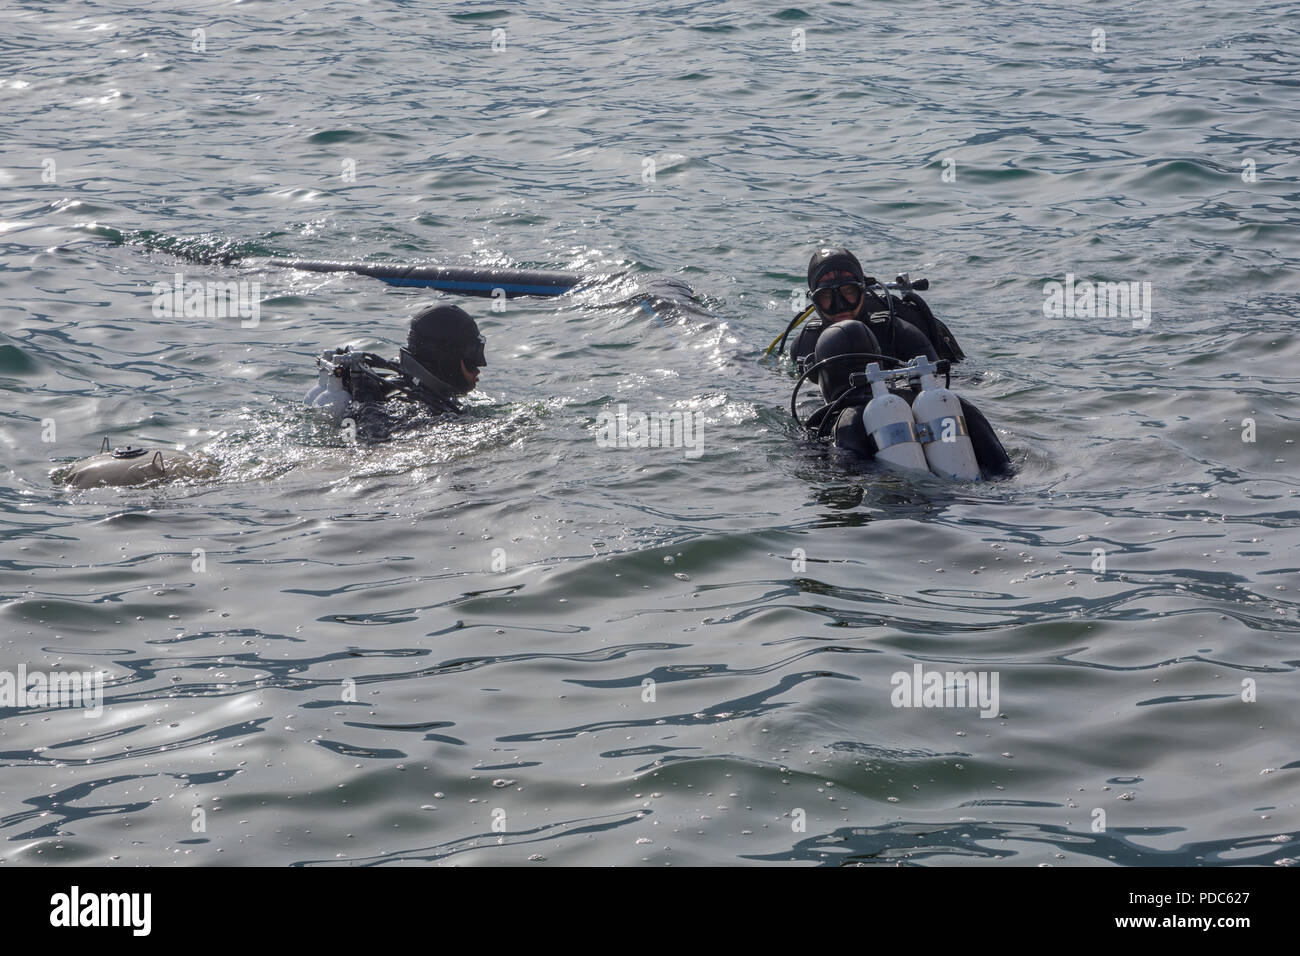 Three (3) male sub-aqua divers in black wetsuits with oxygen bottles swimming in sea with gentle surface waves in the Bay of Kotor, Perast, Montenegro Stock Photo